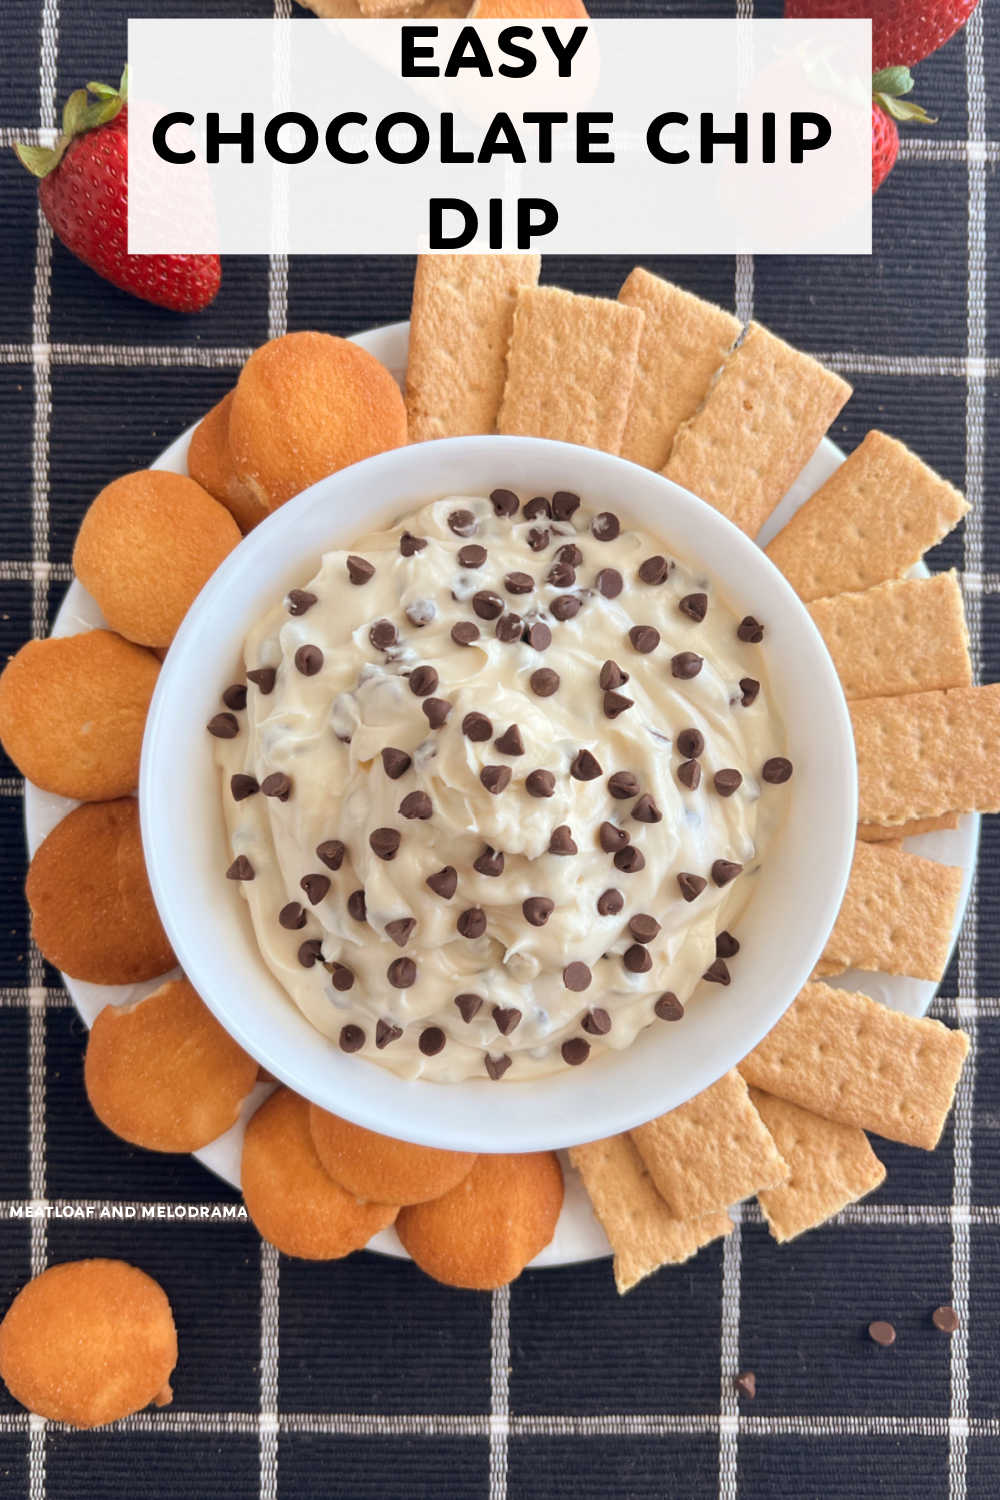 This Chocolate Chip Dip or chocolate chip cheesecake dip, as it is sometimes called, is an easy no bake dessert recipe or sweet treat that comes together in minutes. A delicious dessert dip guaranteed to satisfy your sweet tooth! via @meamel